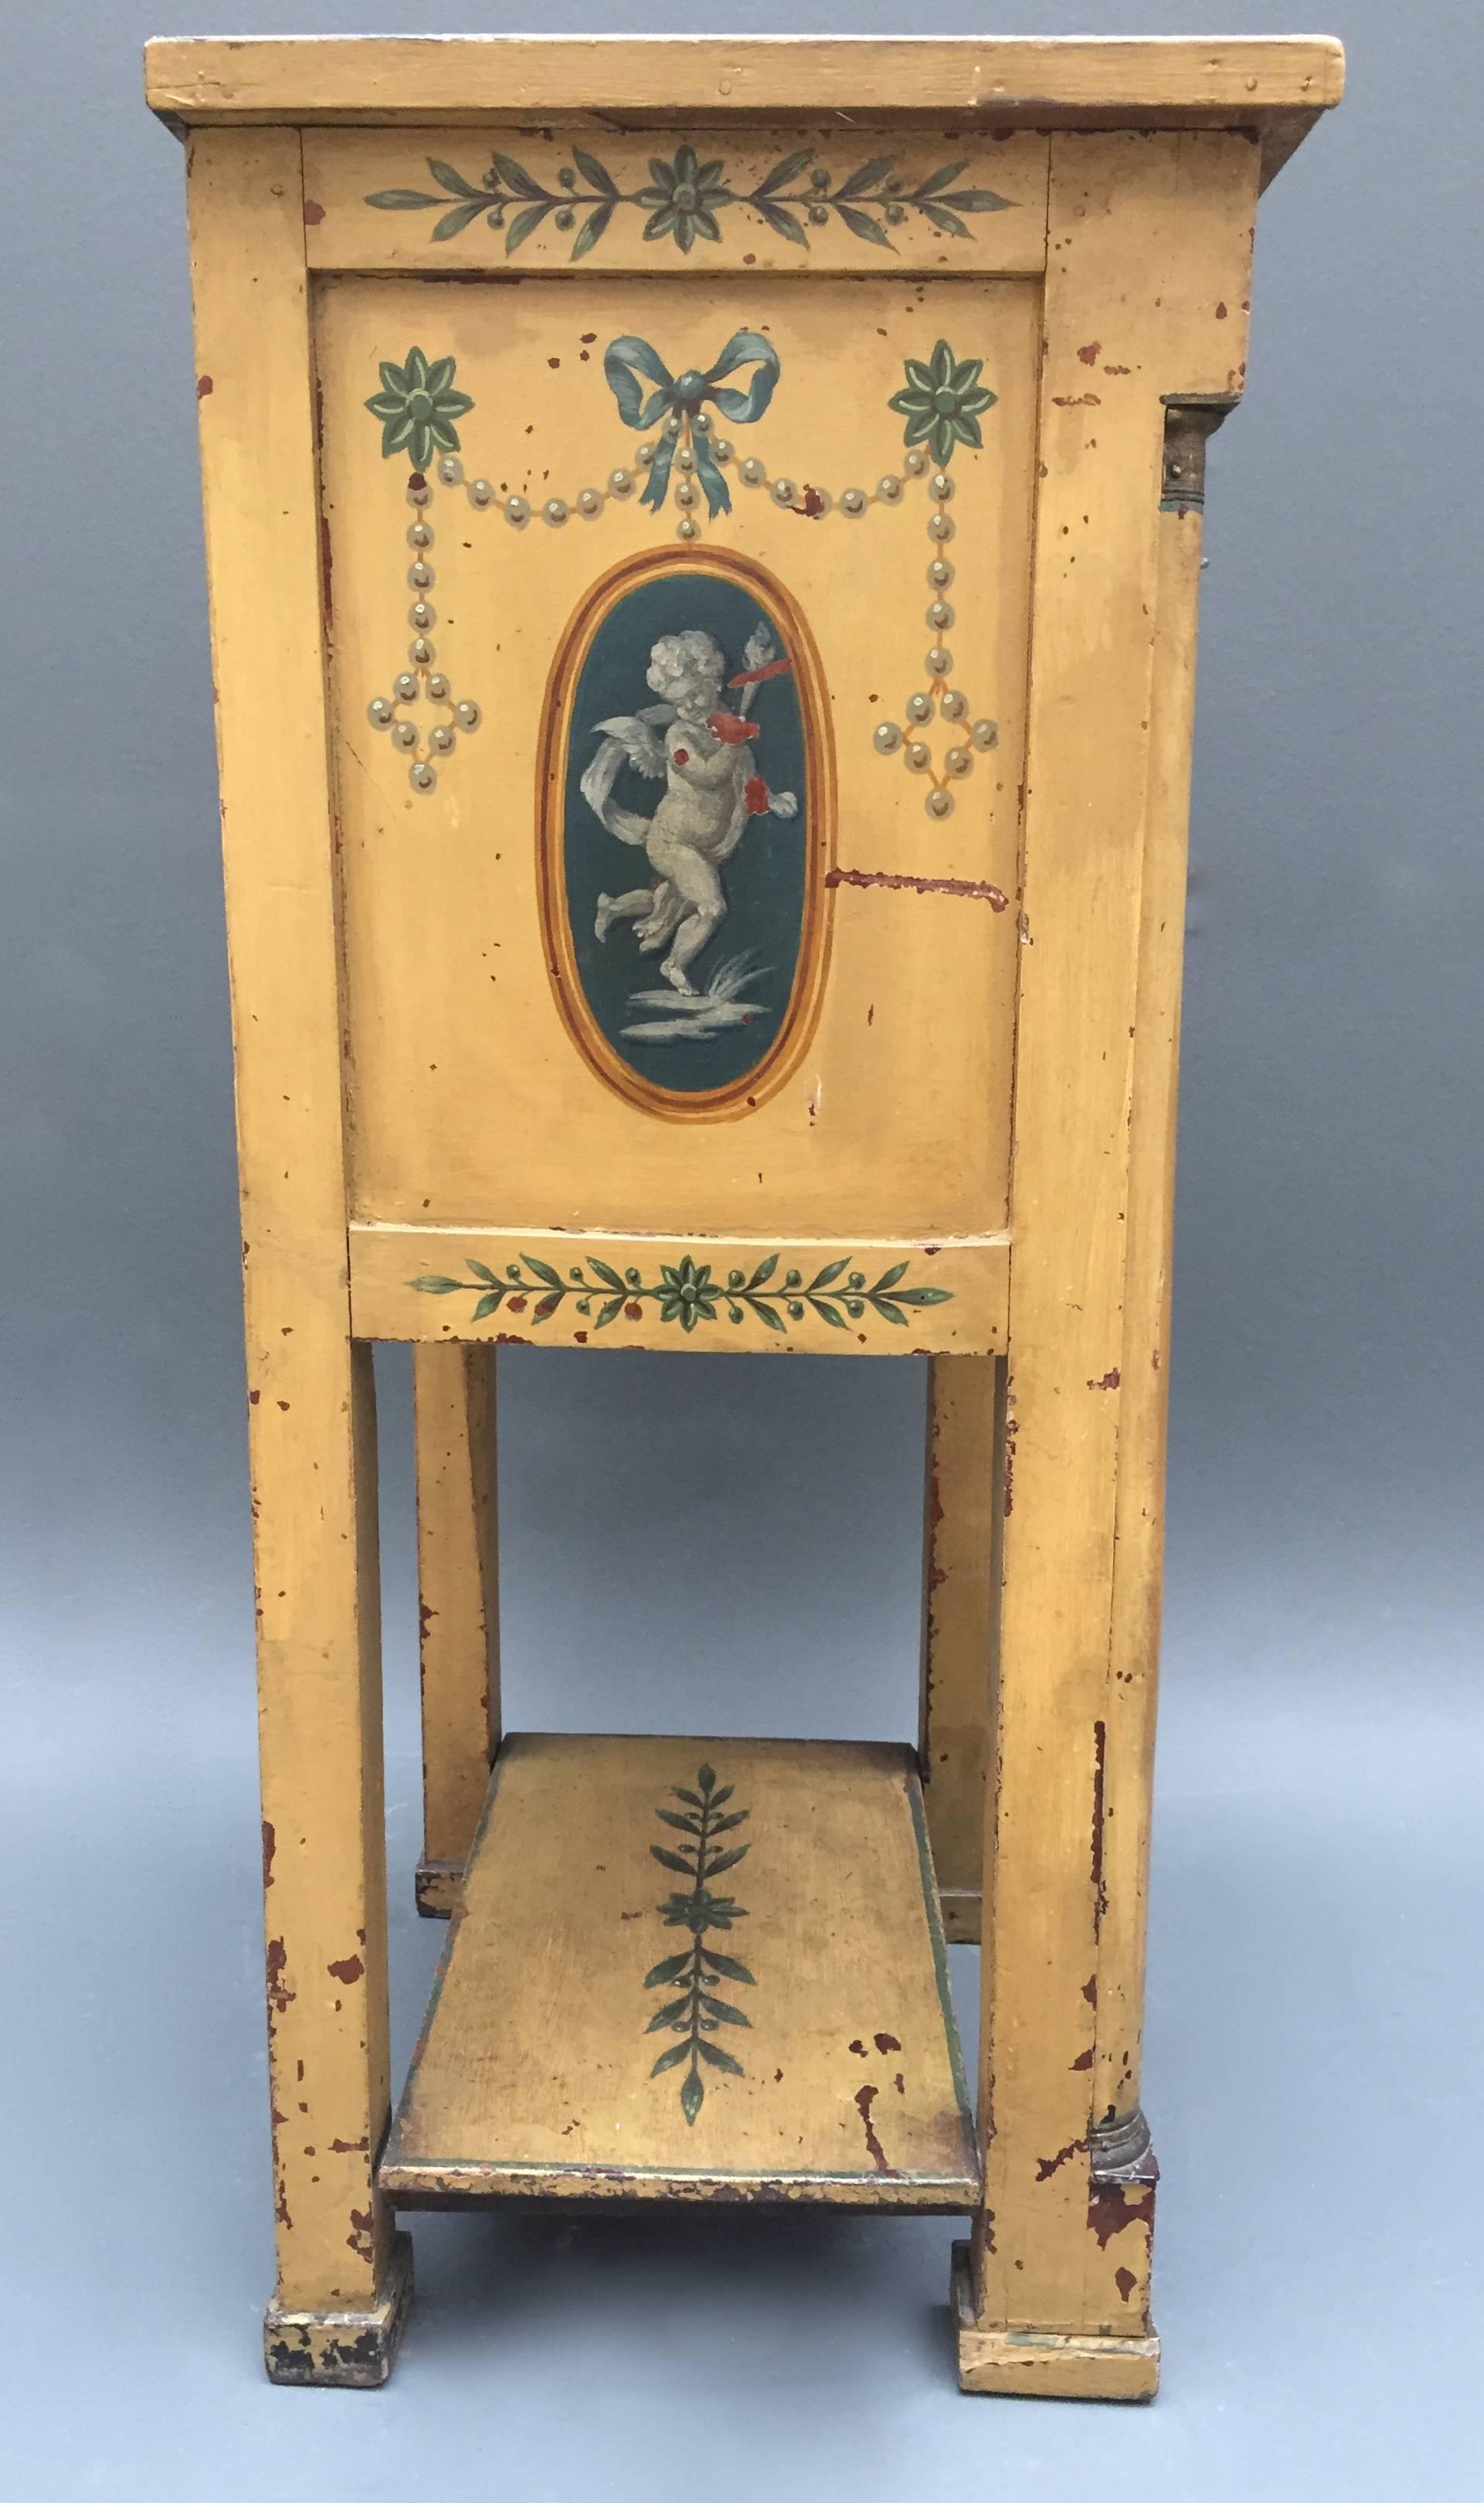 19th Century Austrian Side Table with Three-Drawers and Paintings of Angels (Empire)